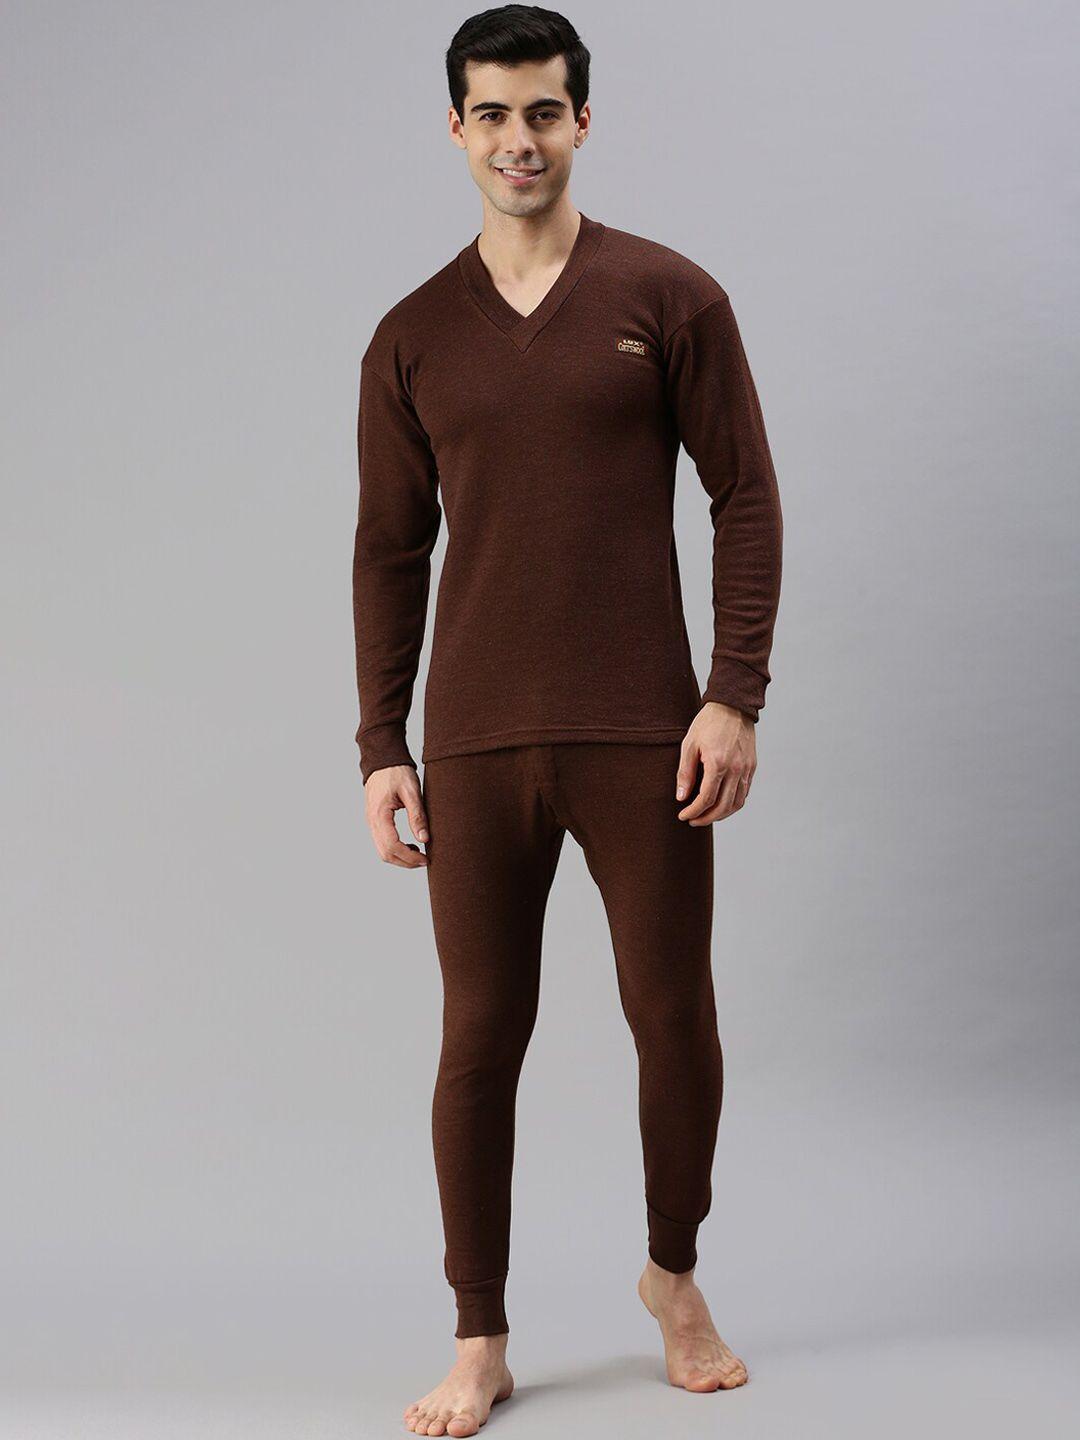 lux cottswool men plus size brown solid cotton thermal set